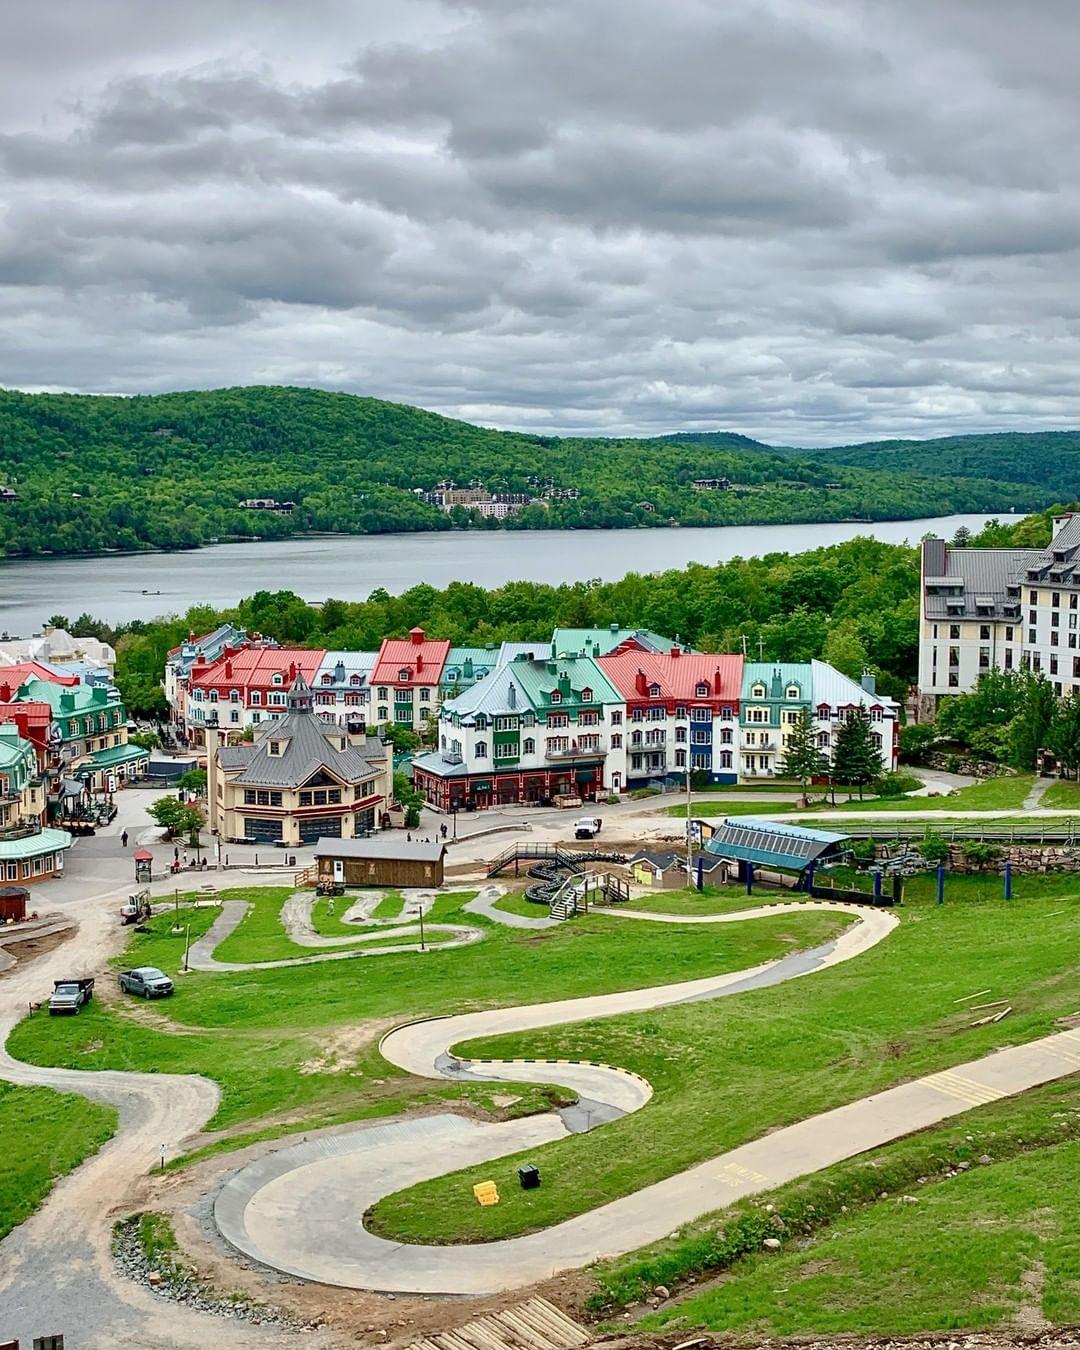 An overview of the Luge tracks with a stunning view of Mont Tremblant behind.